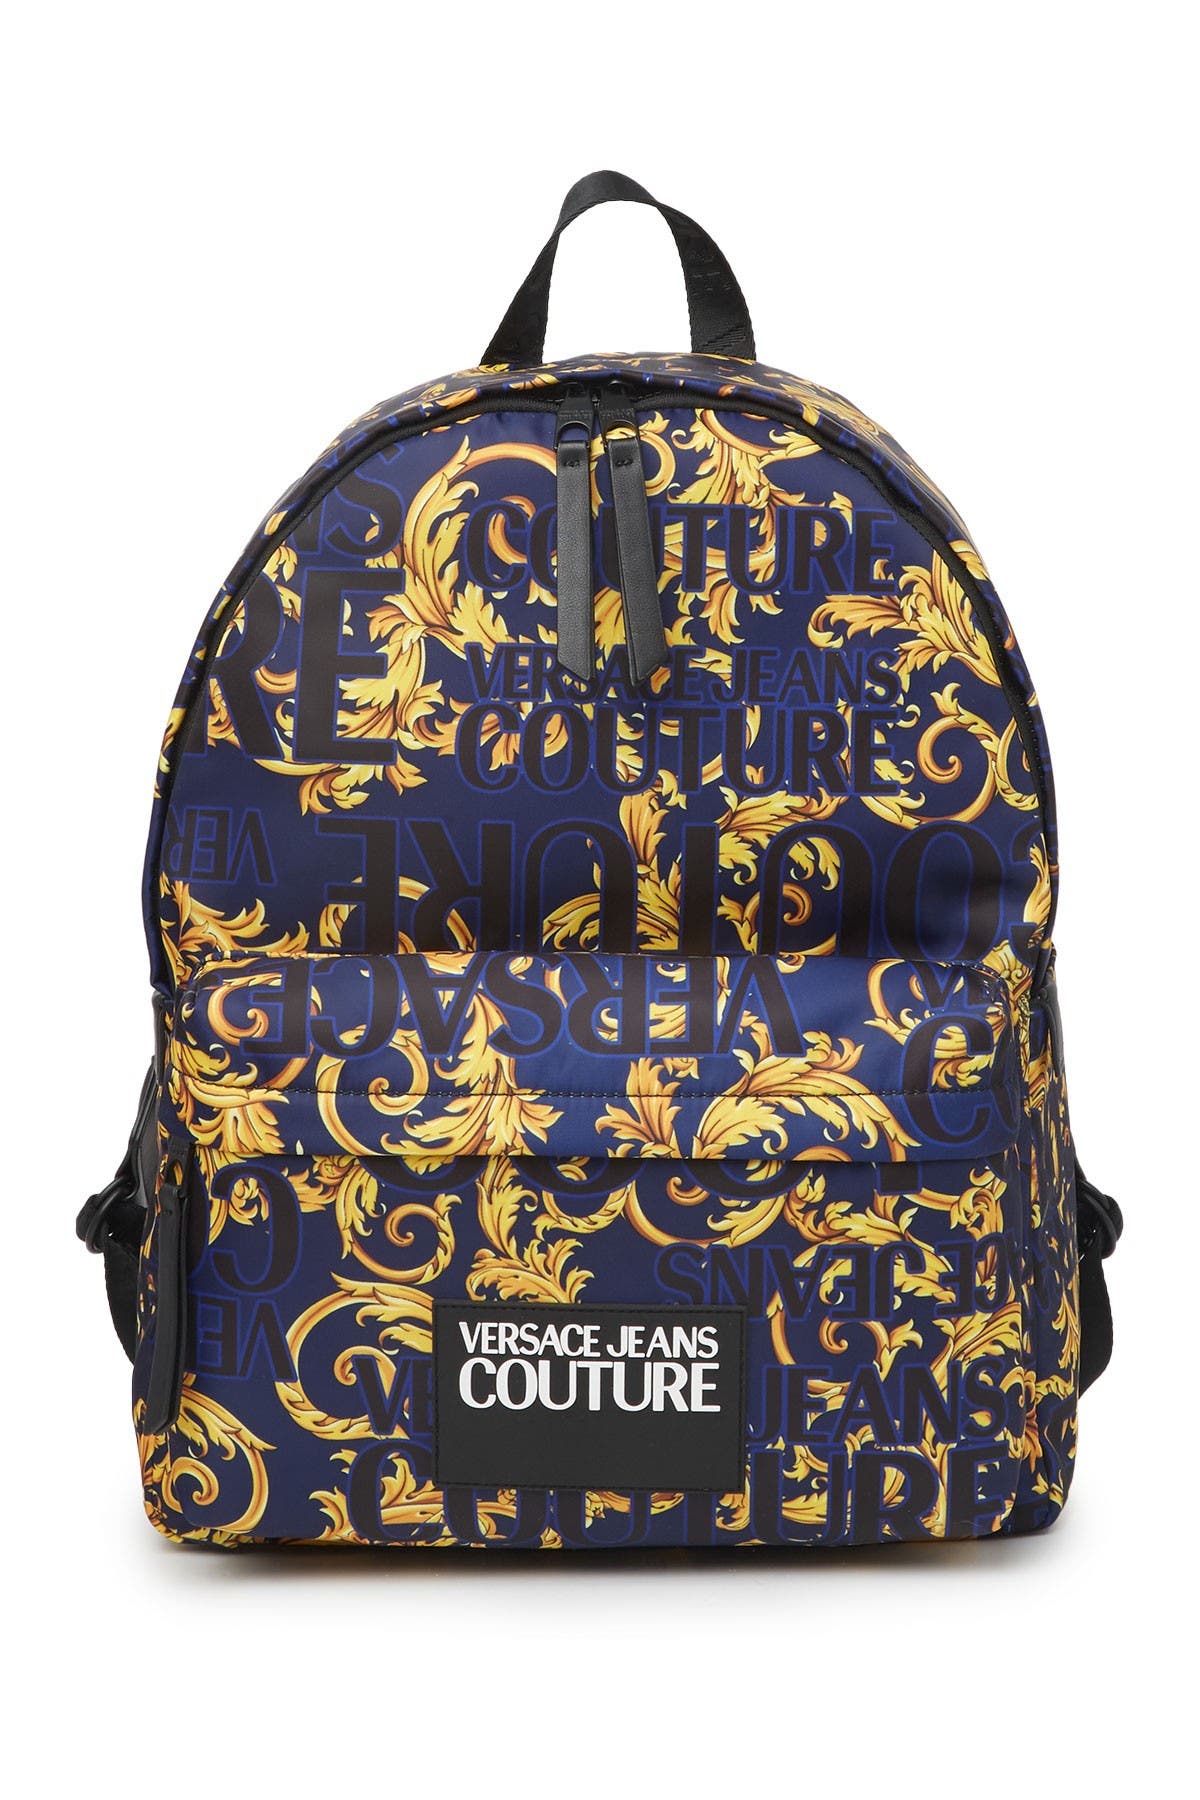 Versace Jeans | Couture Backpack 